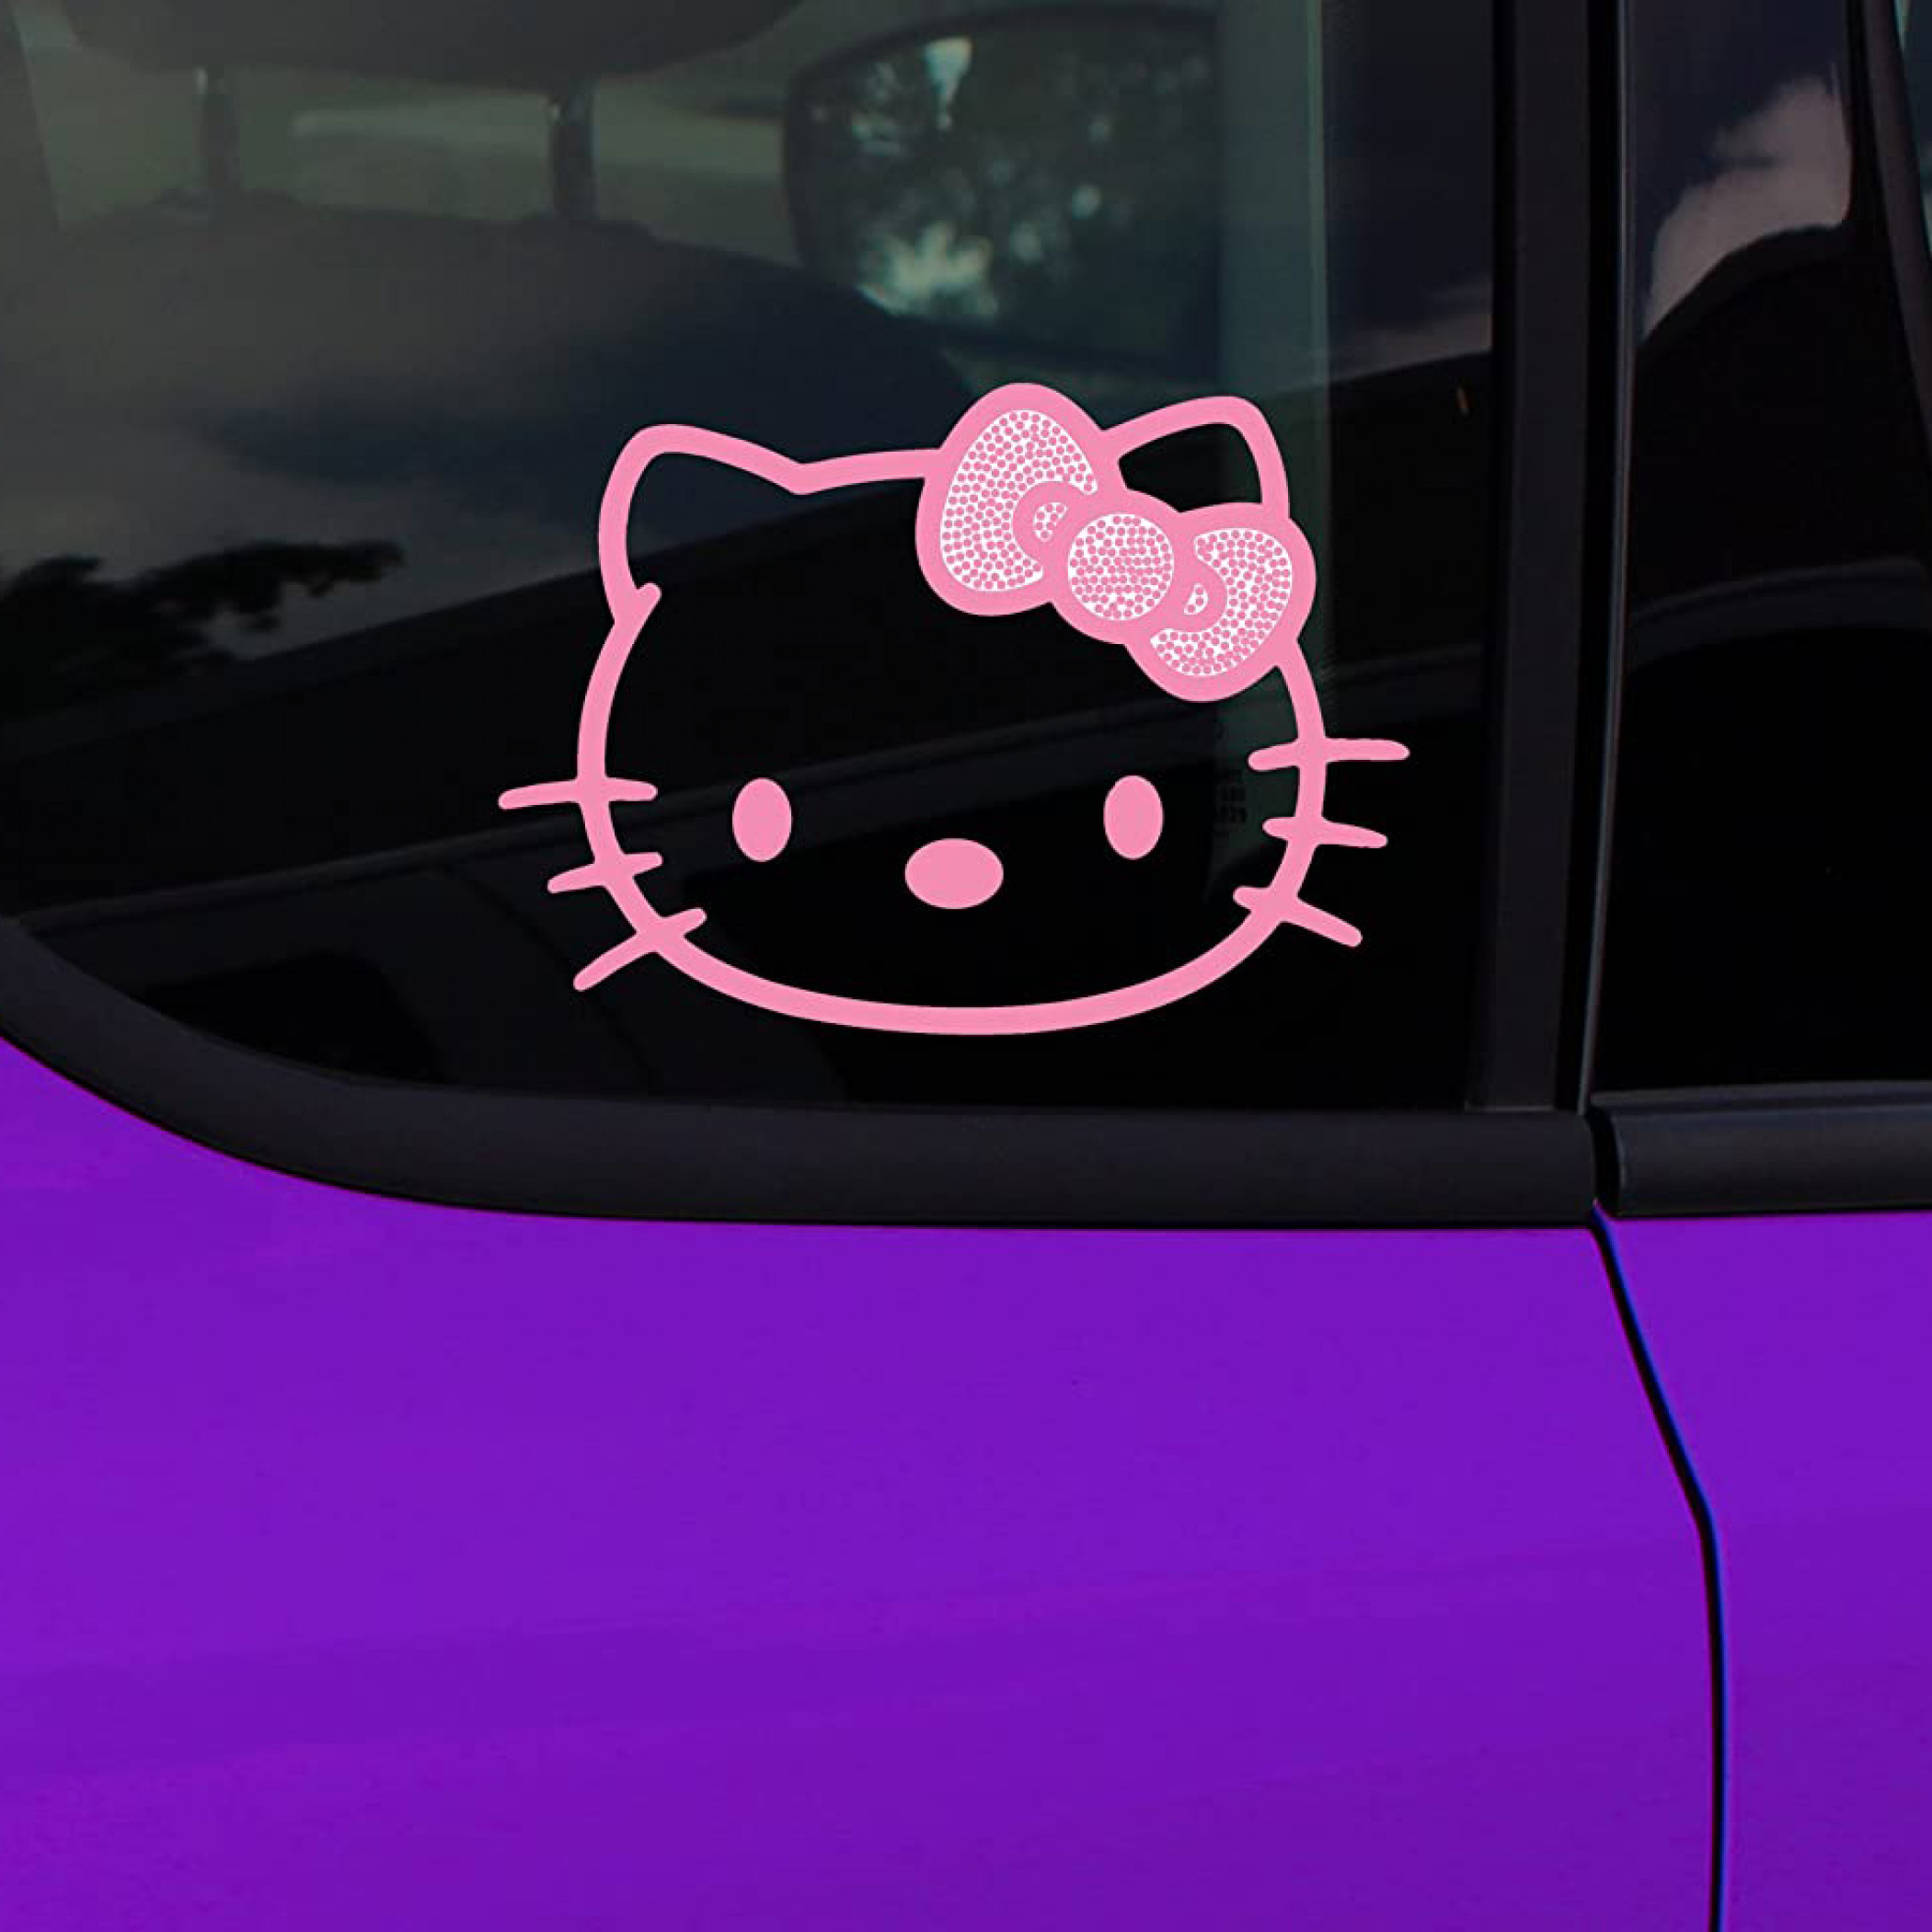 Hello Kitty ClingBling Decal